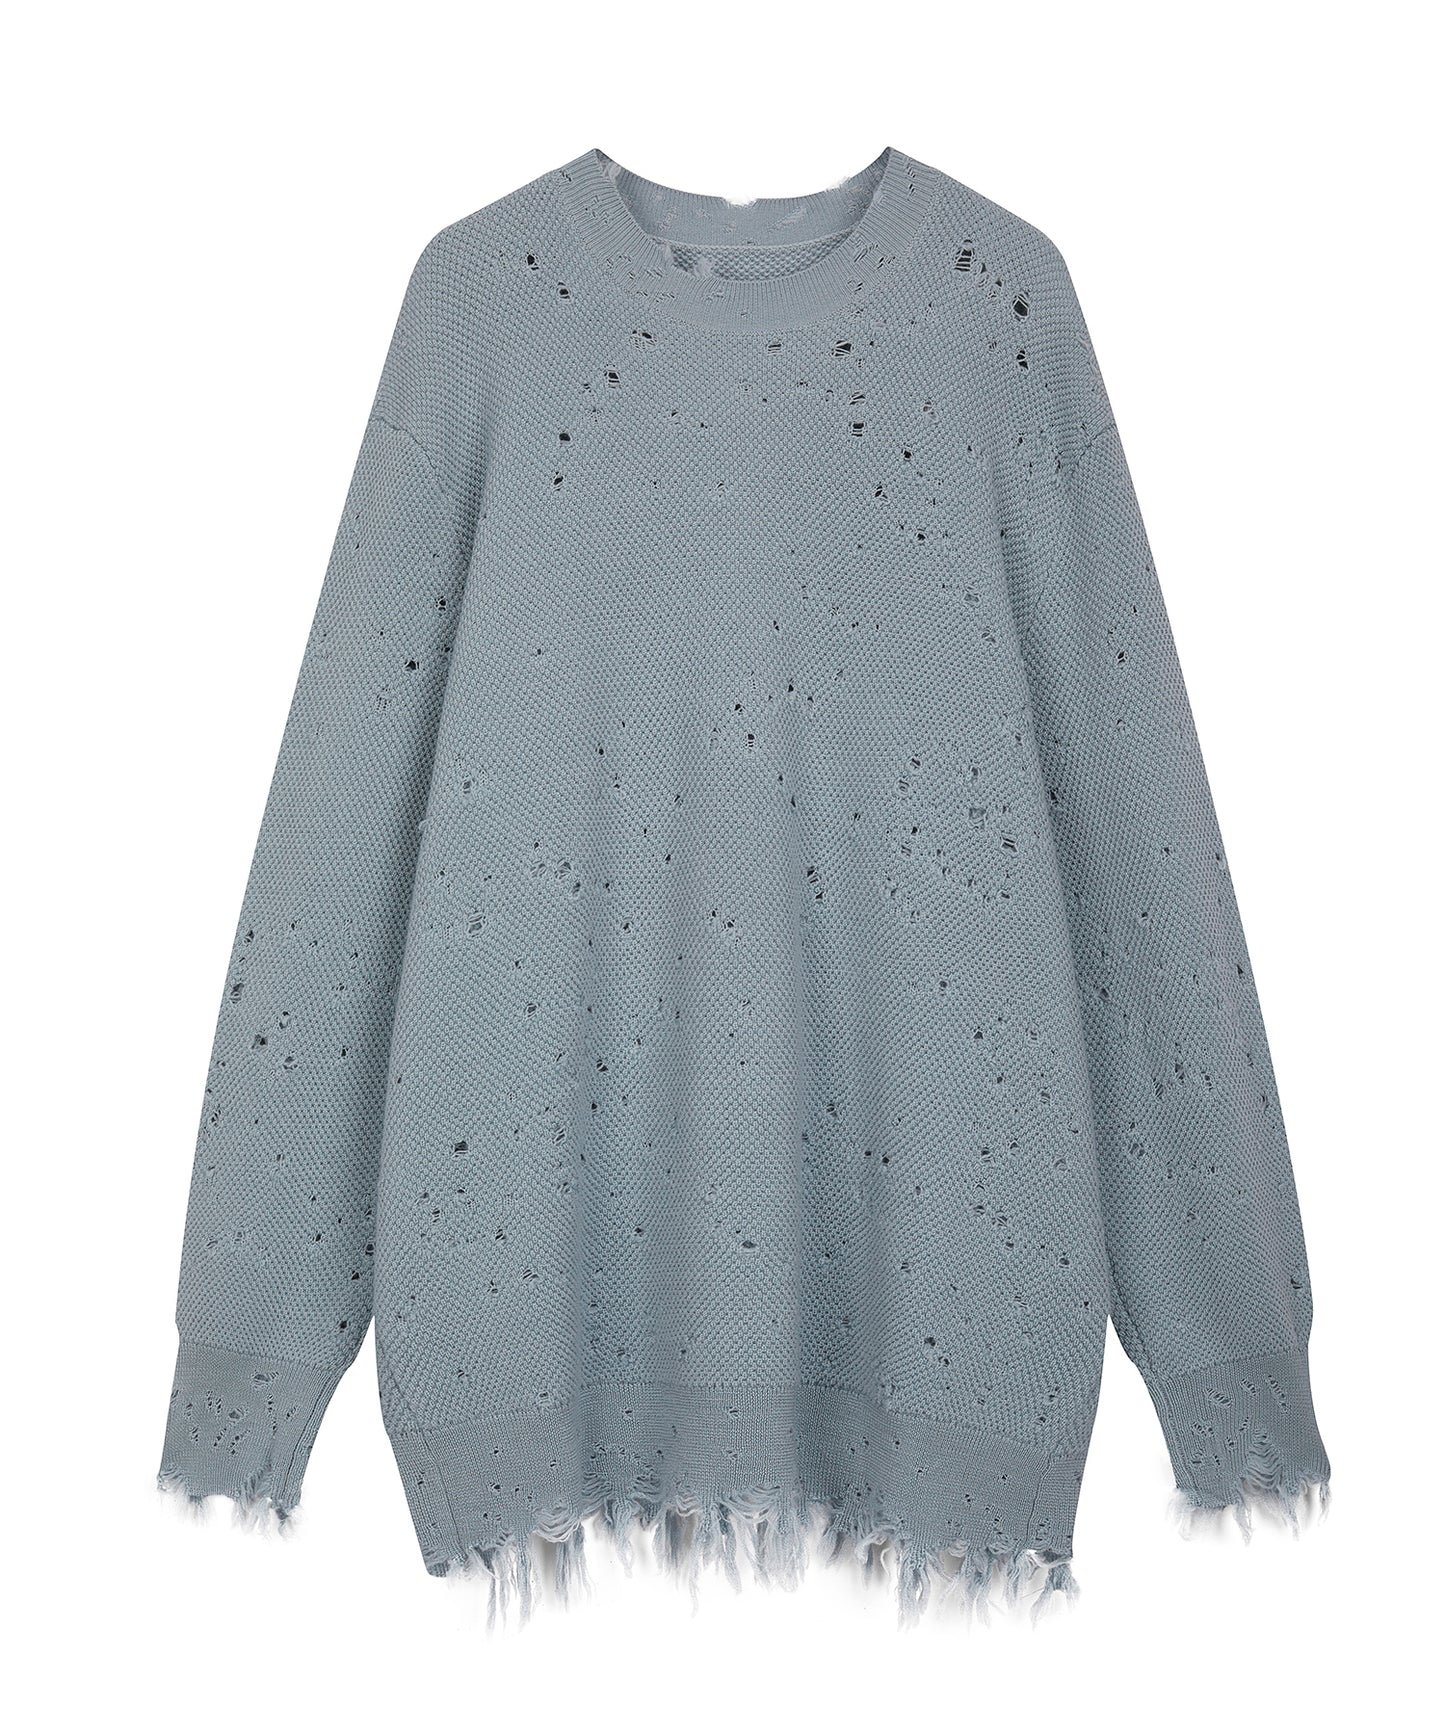 Distressed Fluffy Sweater